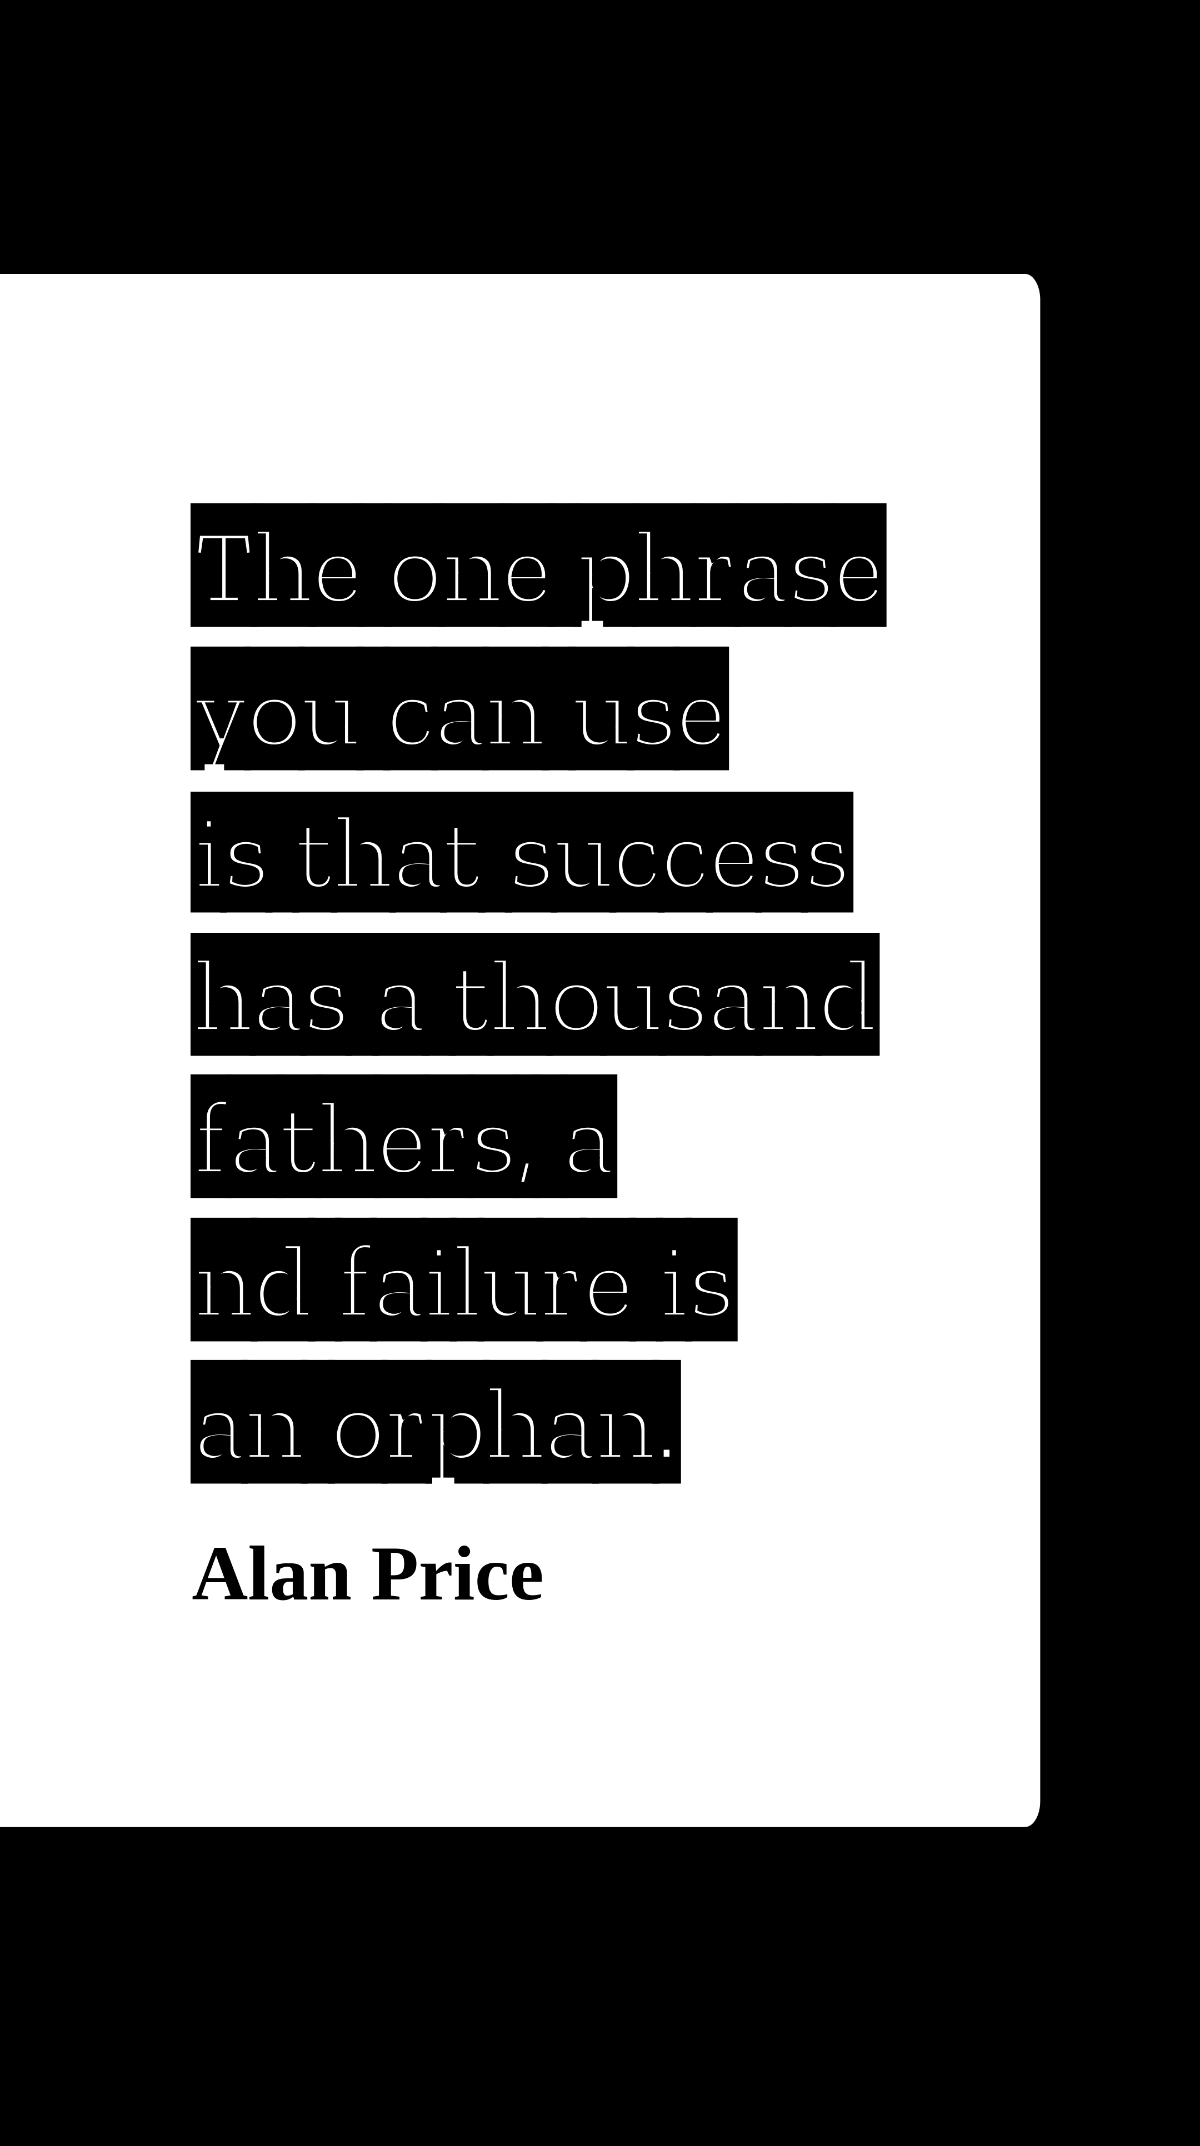 Alan Price - The one phrase you can use is that success has a thousand fathers, and failure is an orphan. Template